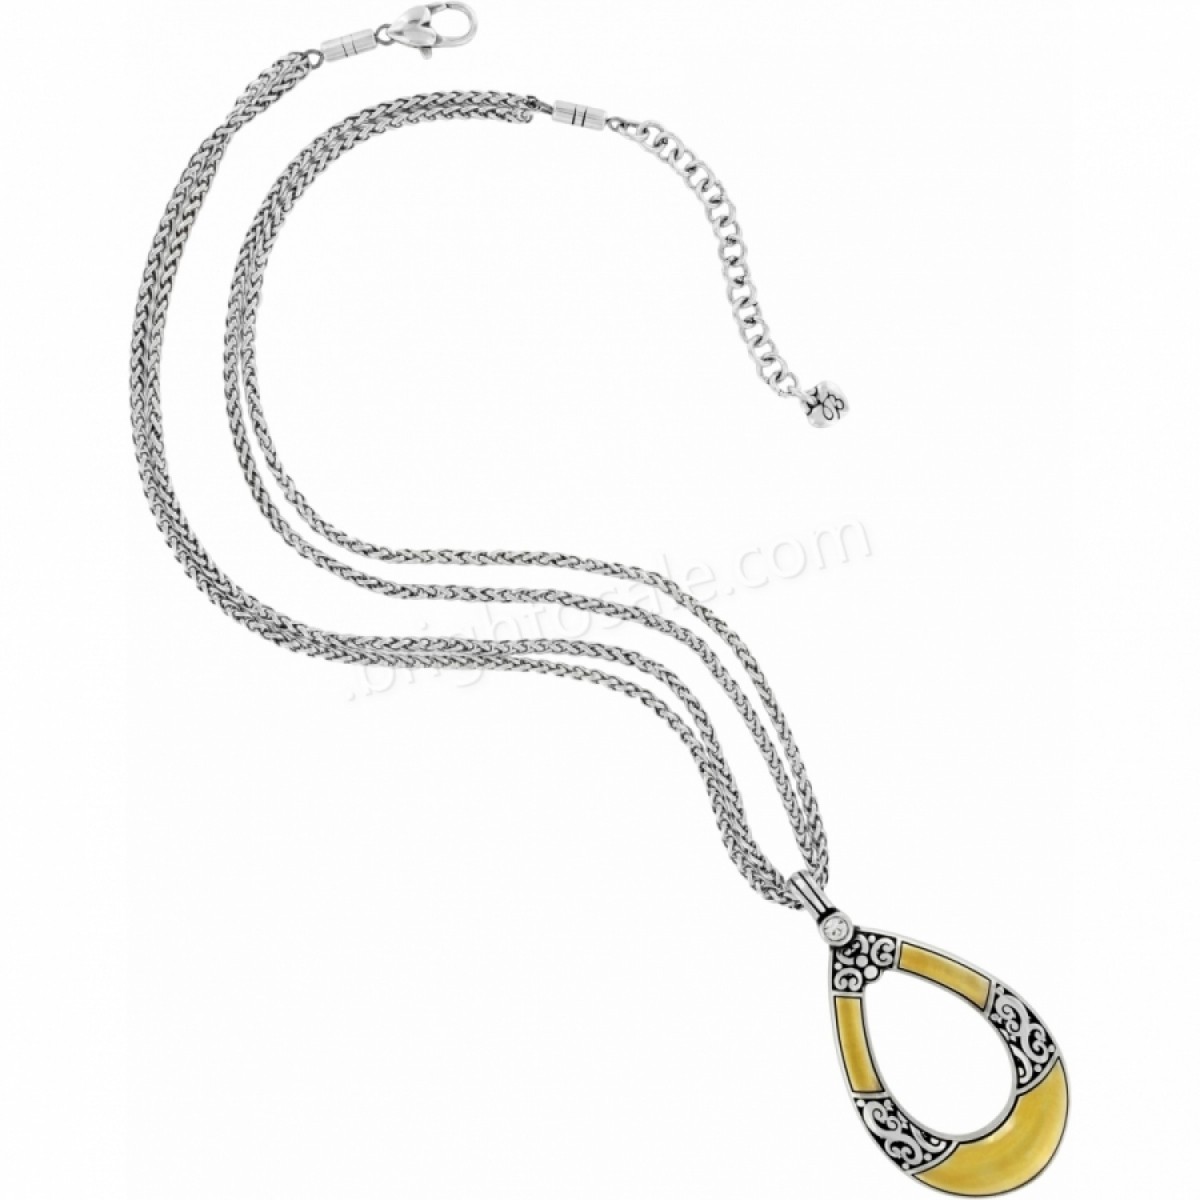 Brighton Collectibles & Online Discount Trust Your Journey Convertible Necklace - -2